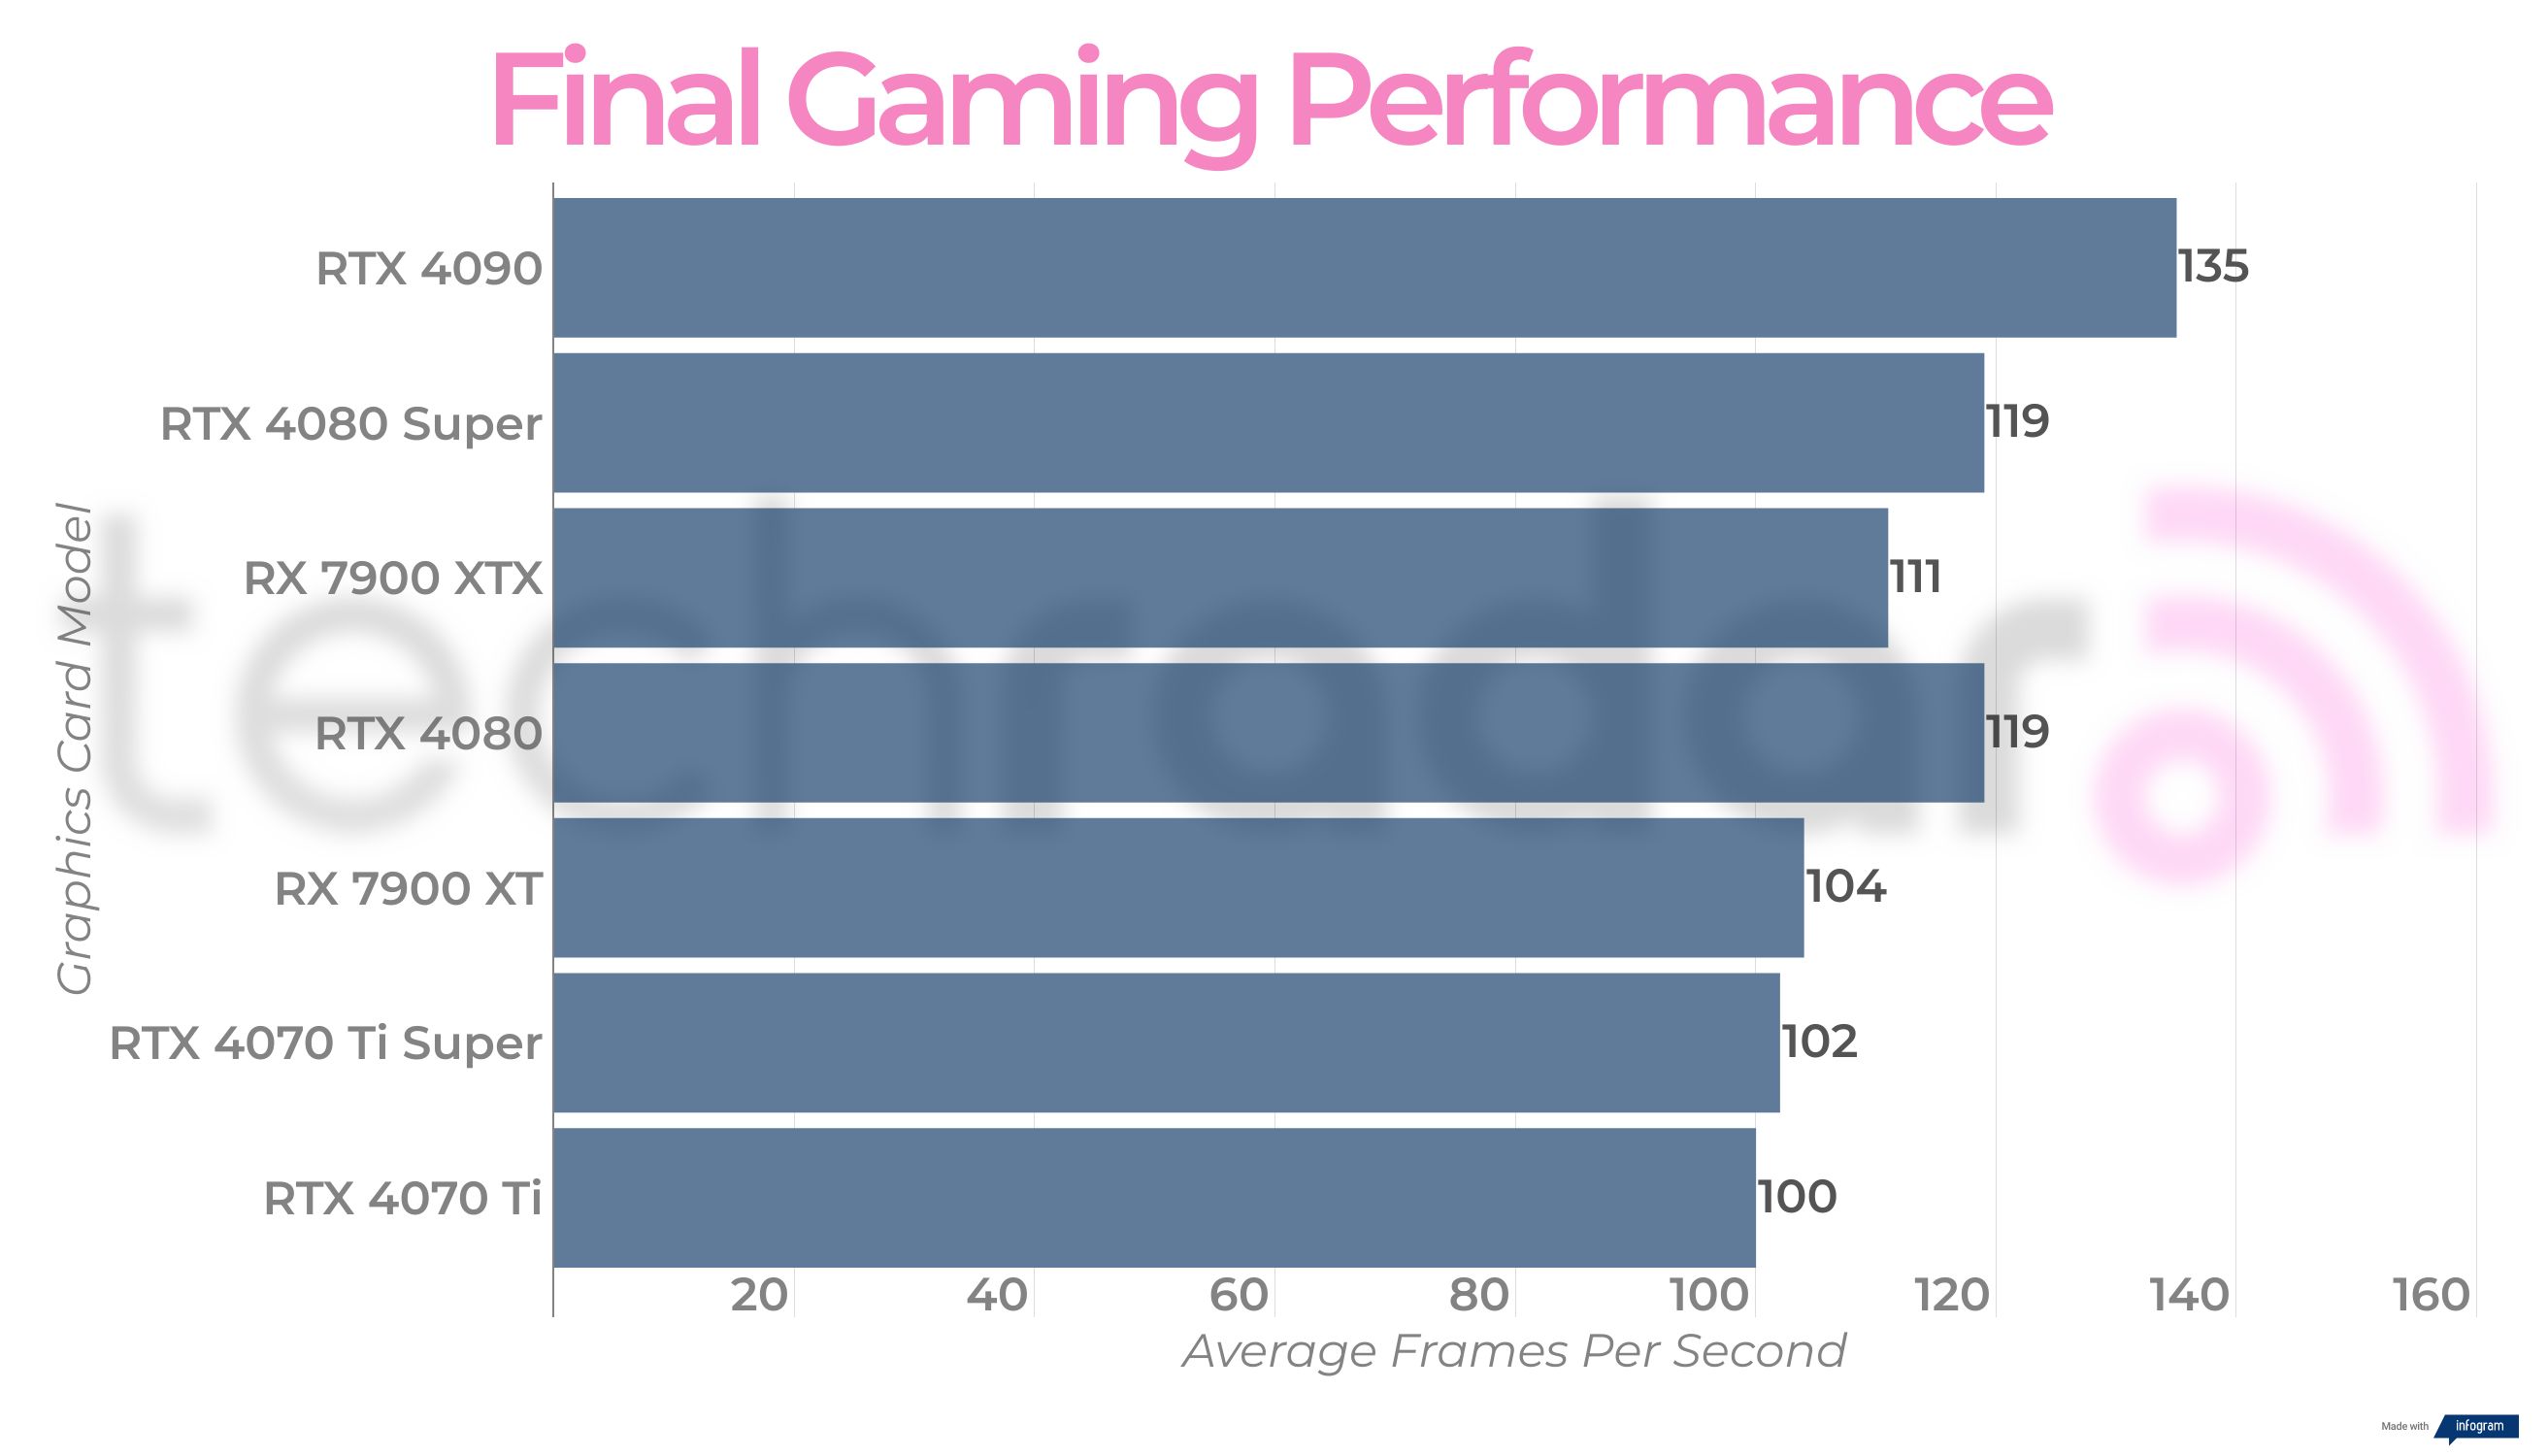 Final performance figures for the Nvidia GeForce RTX 4080 Super